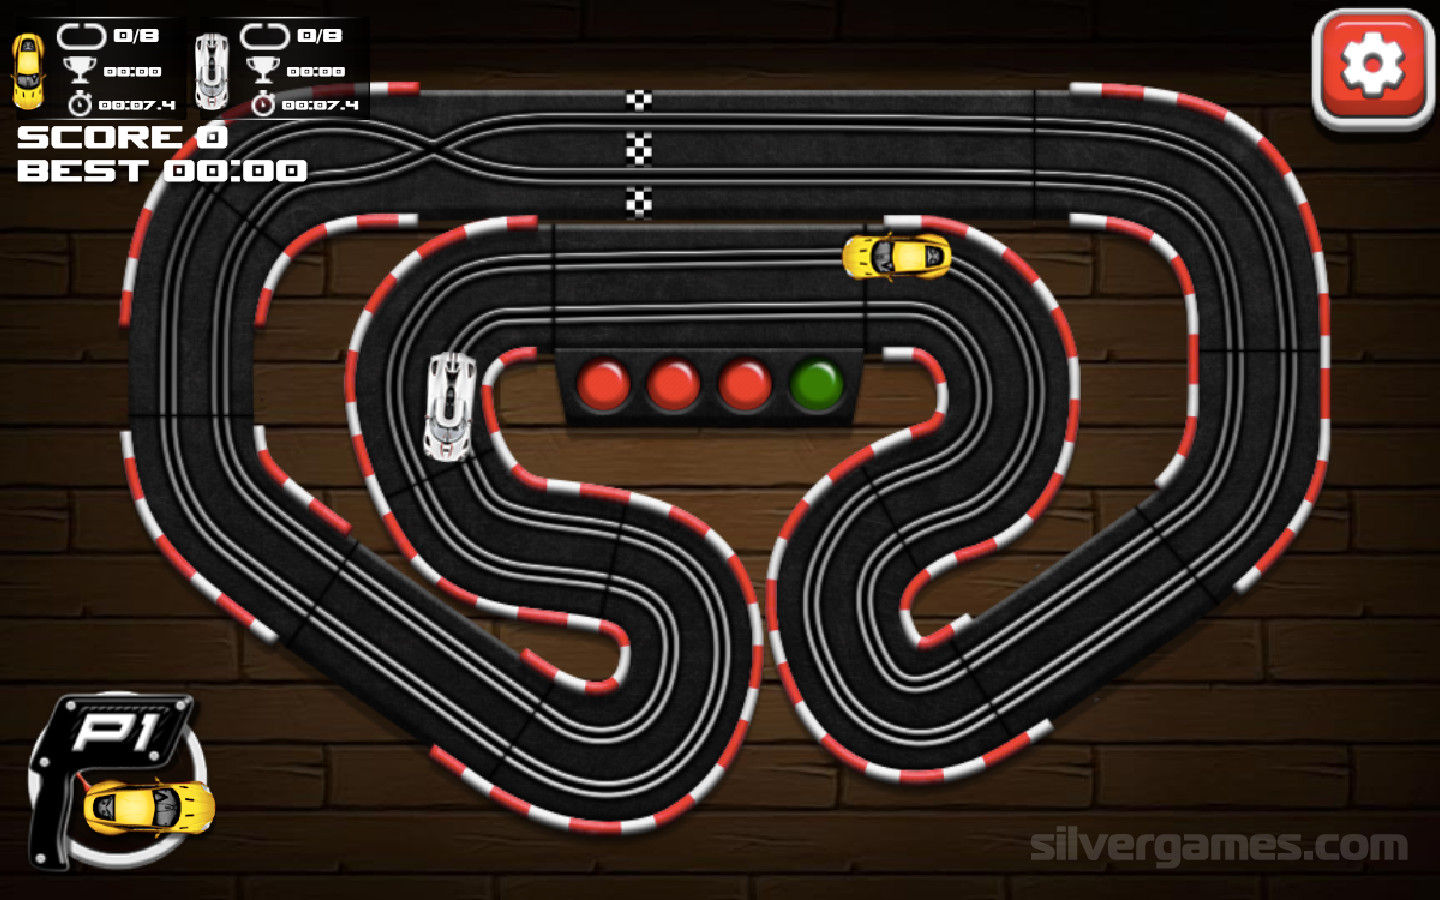 SLOT CAR RACING - Play Online for Free!